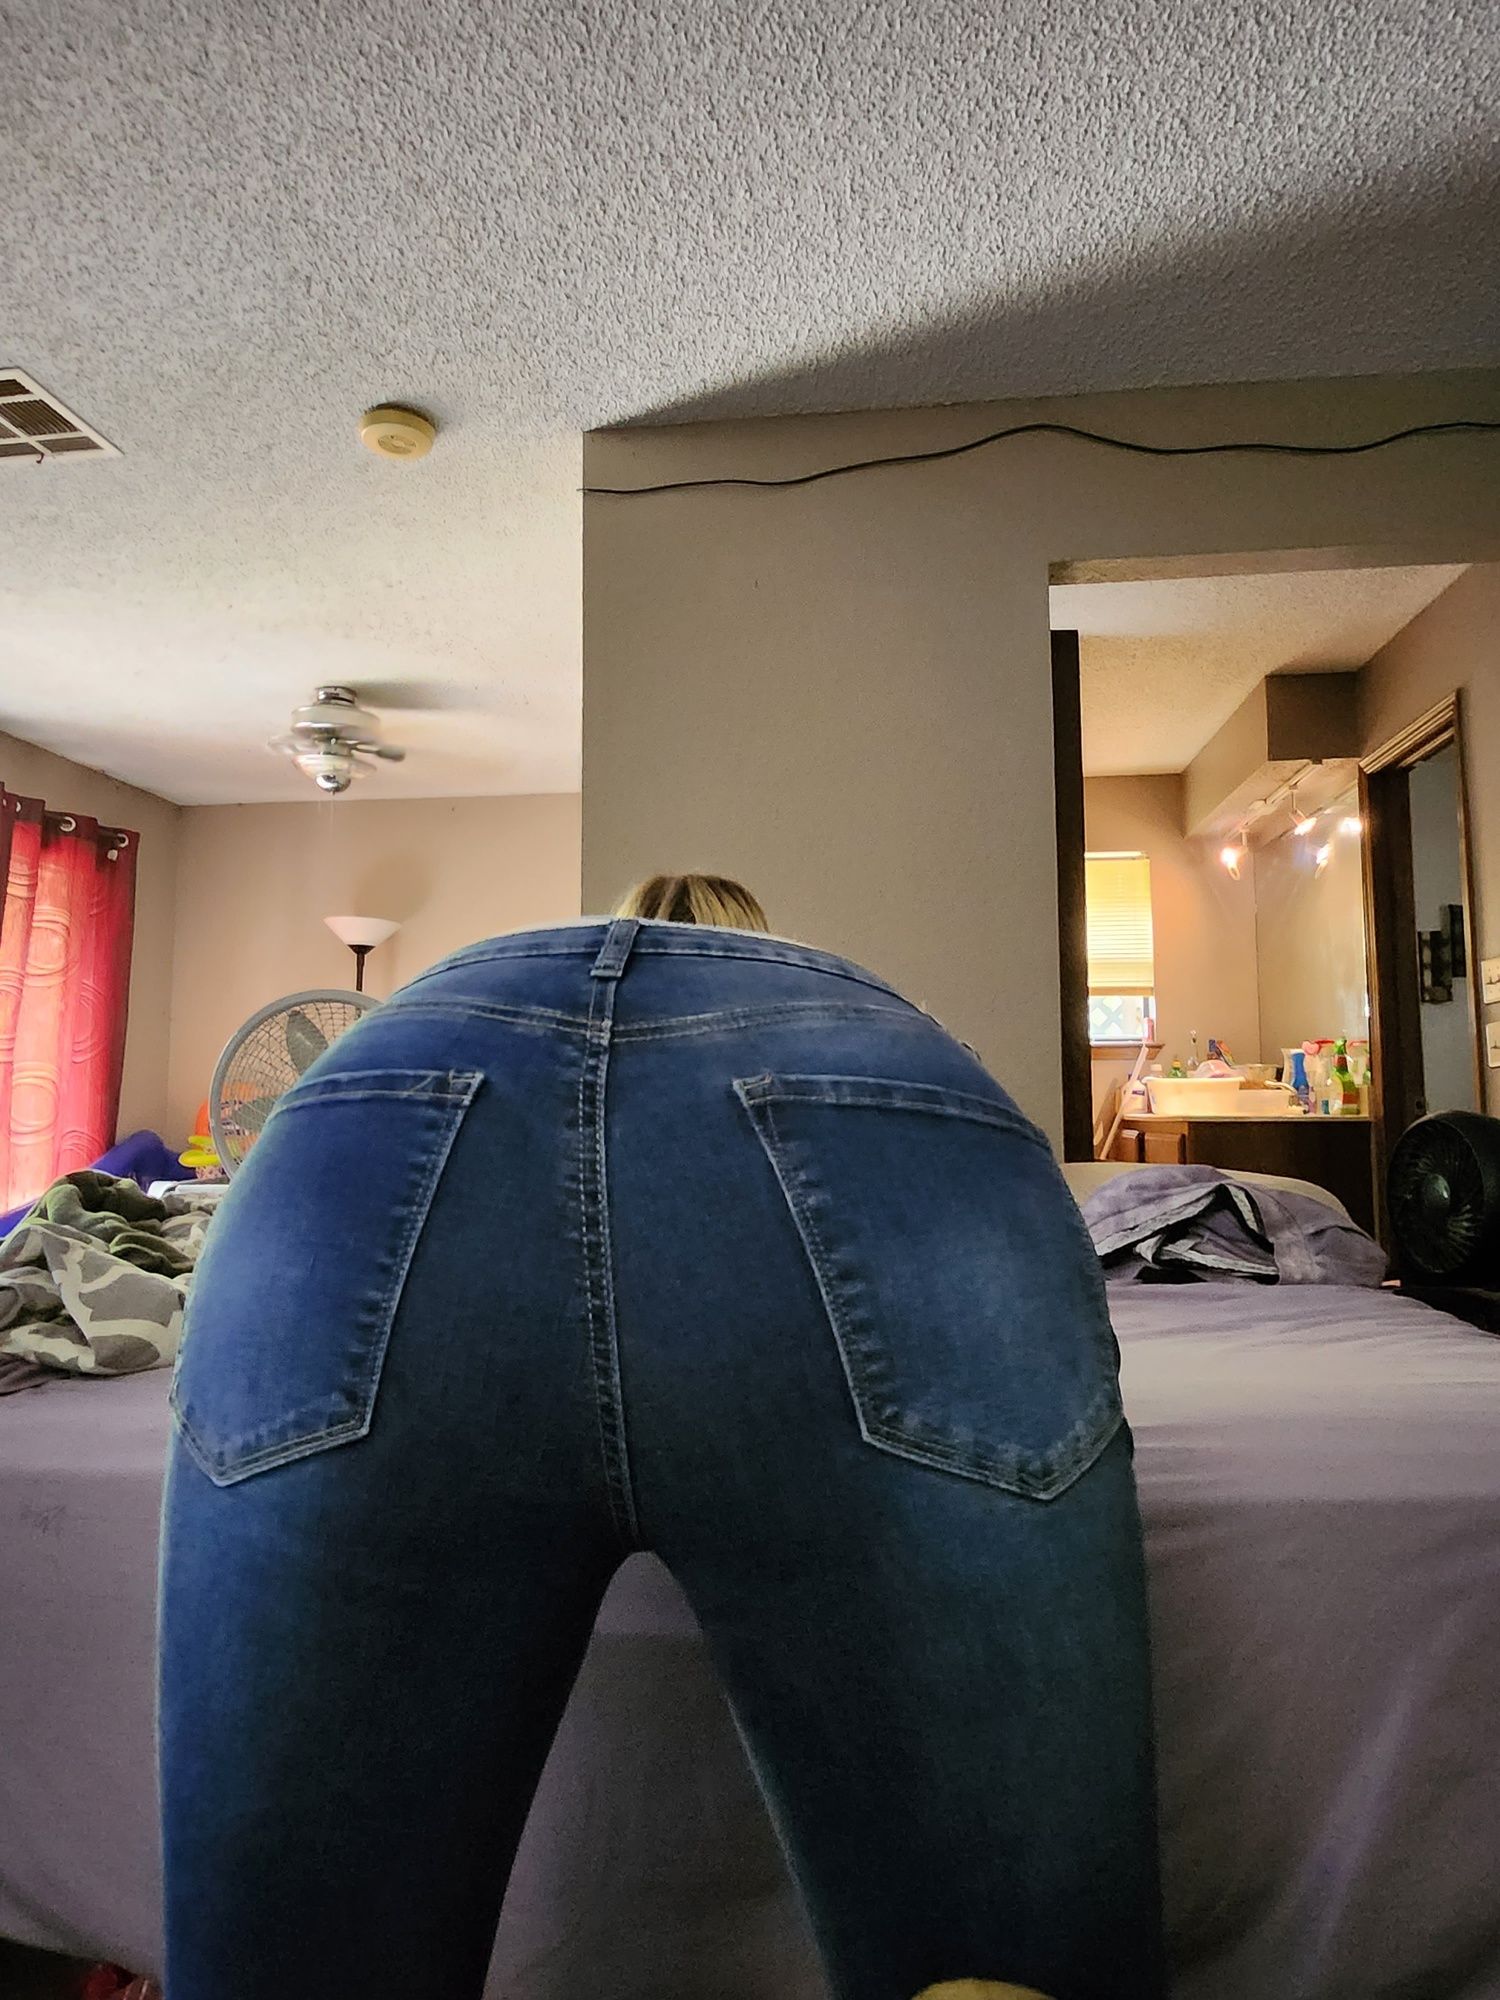 Bodysuits and Jeans - Mama_Foxx94 #15